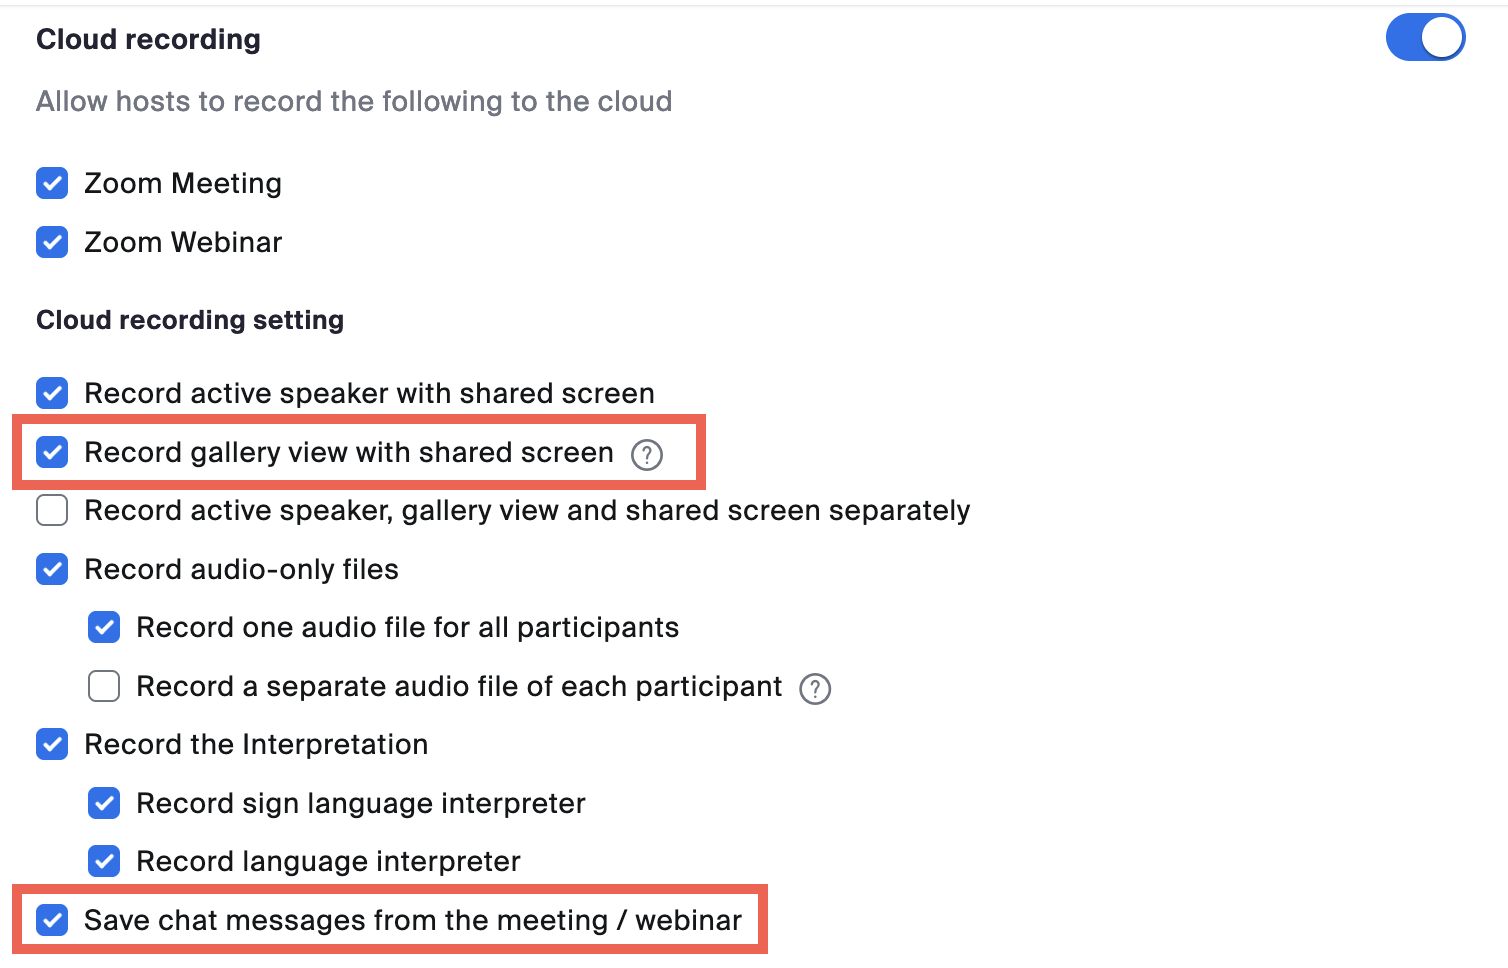 The image shows under Cloud recording, which options to select